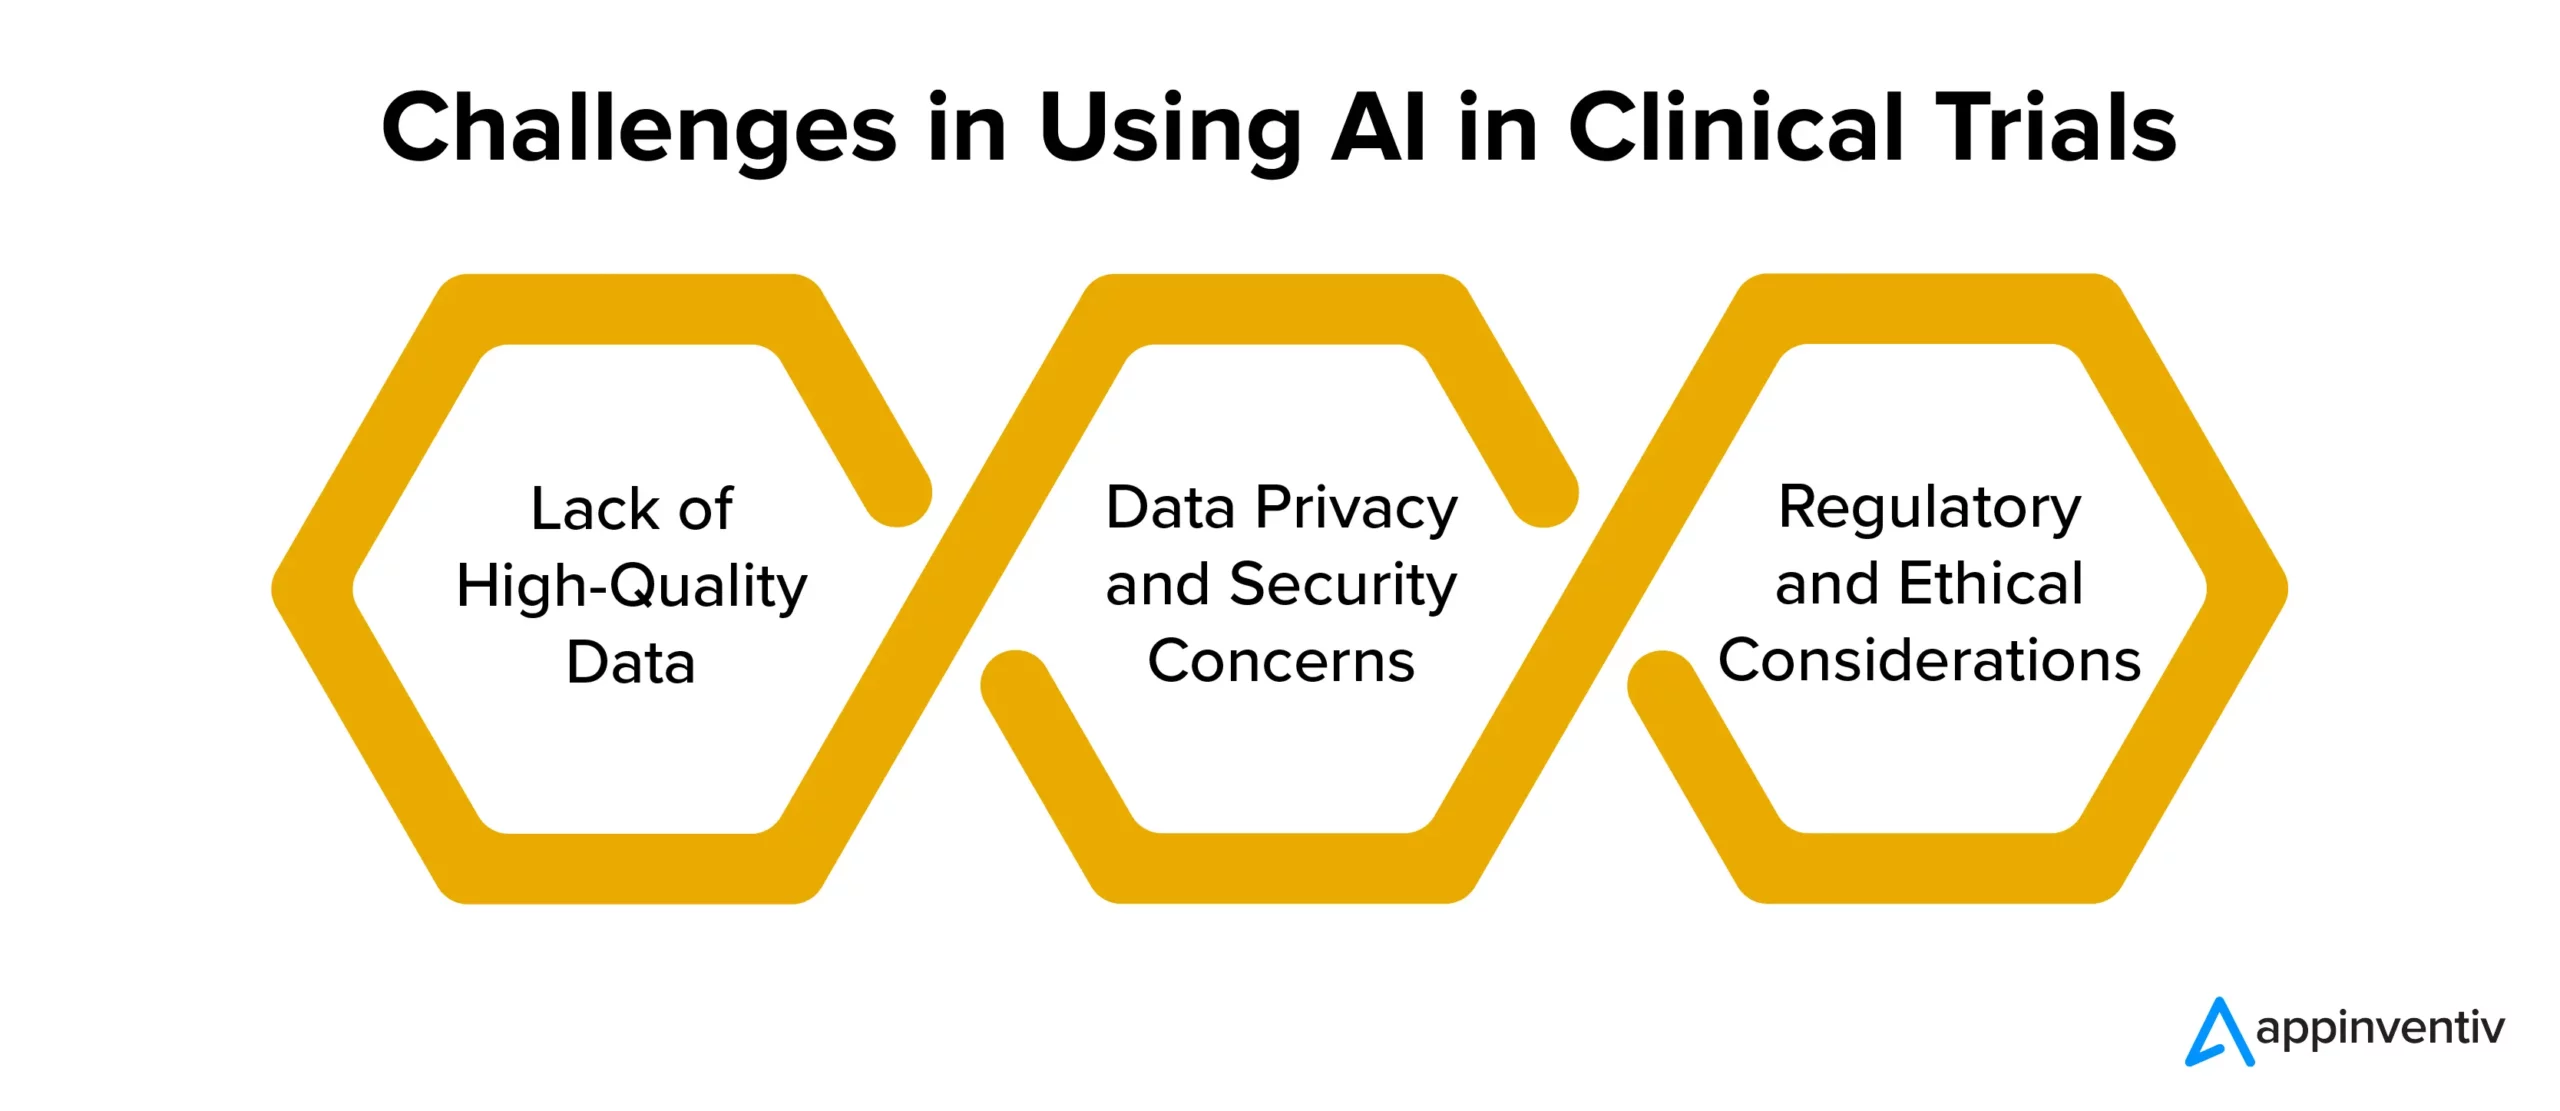 Challenges in Using AI in Clinical Trials